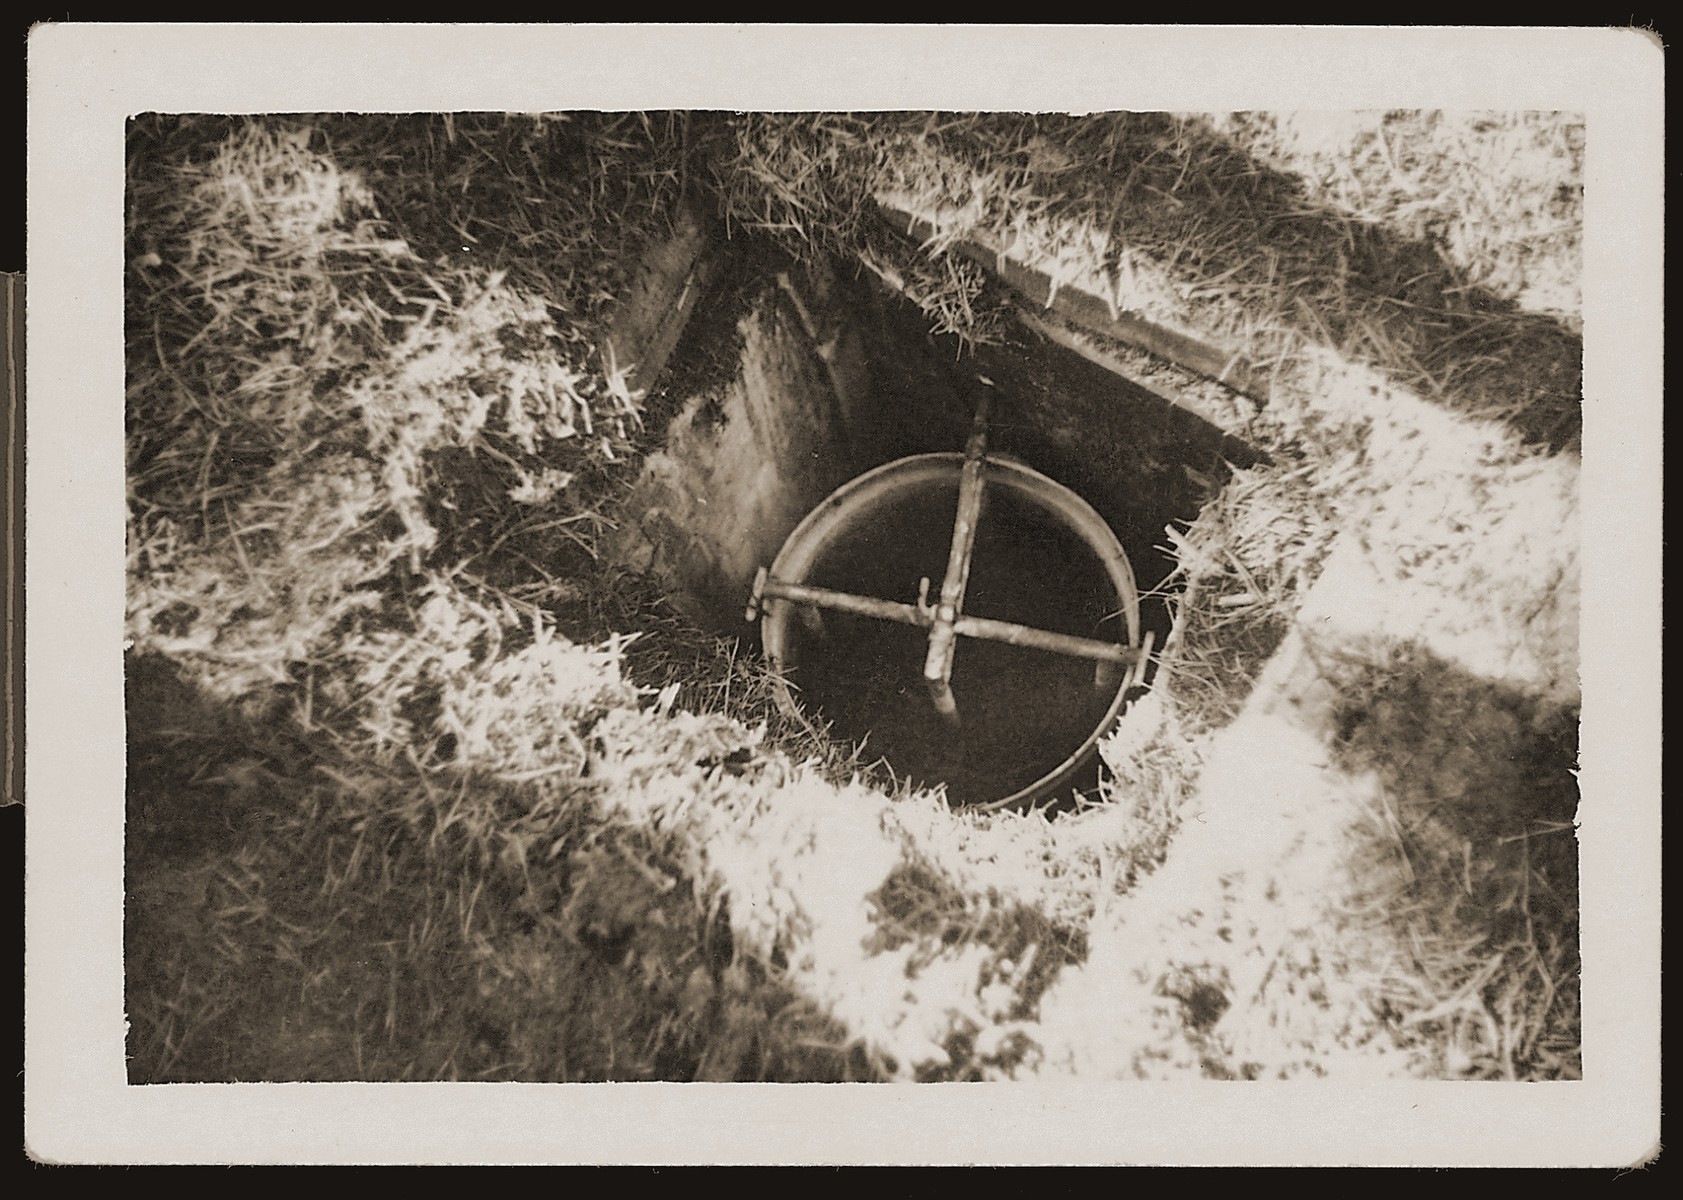 A vent that was installed in a bunker that served as a hiding place for Dutch Jews in the Eibergen region in 1942-1943.  The bunker was discovered by the Germans one day before this photograph was taken.

The bunker was, in actuality, a prefabricated hut that was ordered by two Jewish brothers, Abraham and Herman Maas from Eibergen.  It was delivered in sections to a site in the Hoones Forest outside Eibergen.  The Maas brothers got permission from the manager of the privately-owned forest to build a subterranean hiding place for themselves.  Two sympathetic non-Jews conveyed the materials, dug the hole and assembled the shelter, which had two rooms and a crude stove.  Initially, only the brothers hid there, but as times grew more desperate, 23 Jews were concealed in the bunker.  On March 27, 1943 a Dutch informer led Germans to the site.  All 23 were arrested and sent to Westerbork.  From there they were deported to Sobibor and killed.  After the war the informer was identified as E. Heijink and tried as a collaborator.

The photographer was a Dutchman, who was ordered to take pictures of the bunker the day after the Jews were captured.  He made an extra set of prints, which he kept secretly, and made available to resisters and surviving Jews after the liberation.  The policeman posed inside the bunker in order to better convey its size.